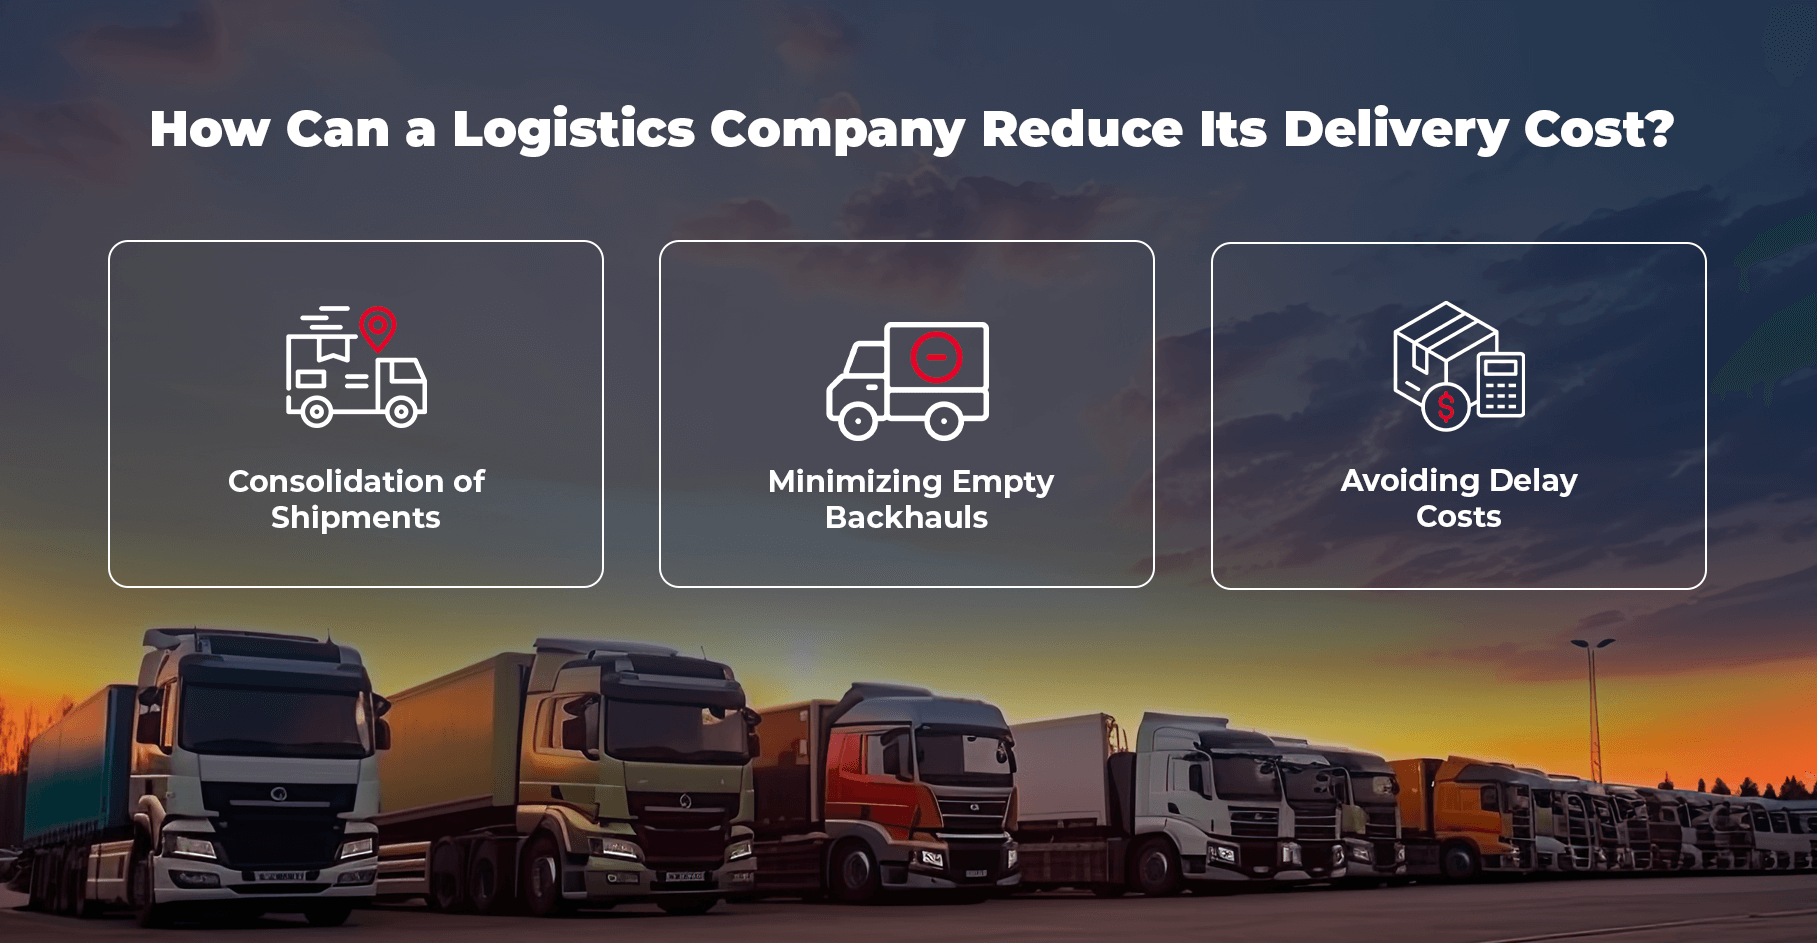 How Can a Logistics Company Reduce Its Delivery Cost with LogiNext